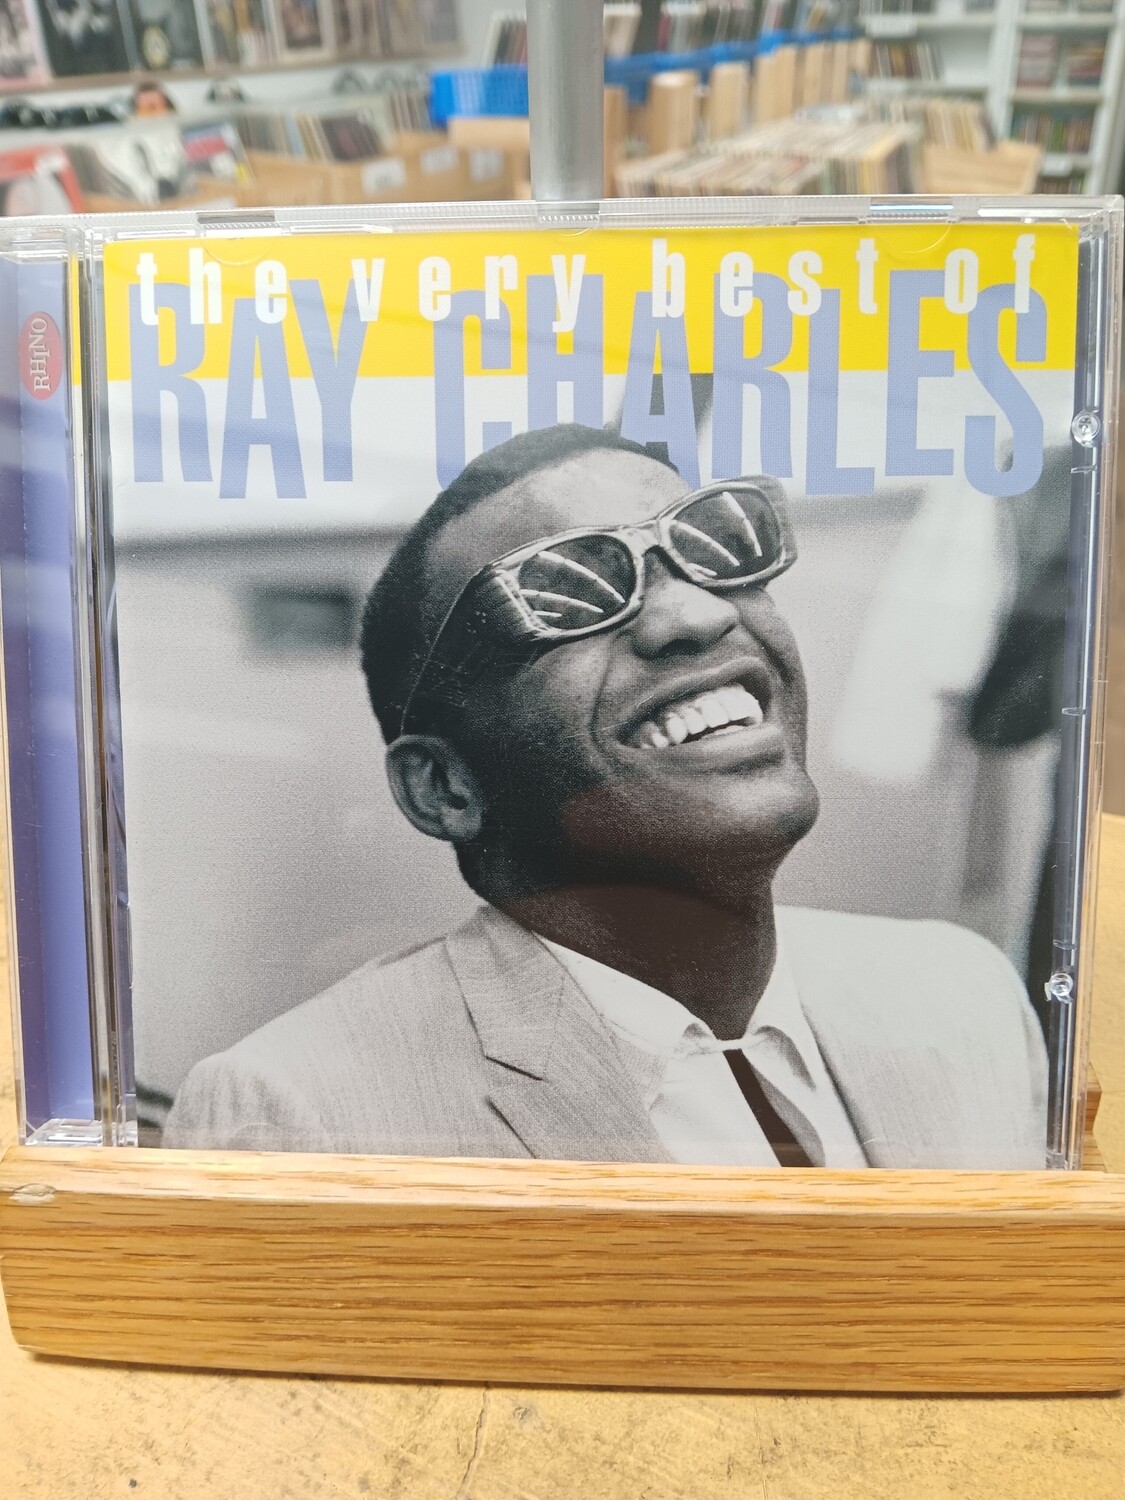 RAY CHARLES - The very Best (CD)